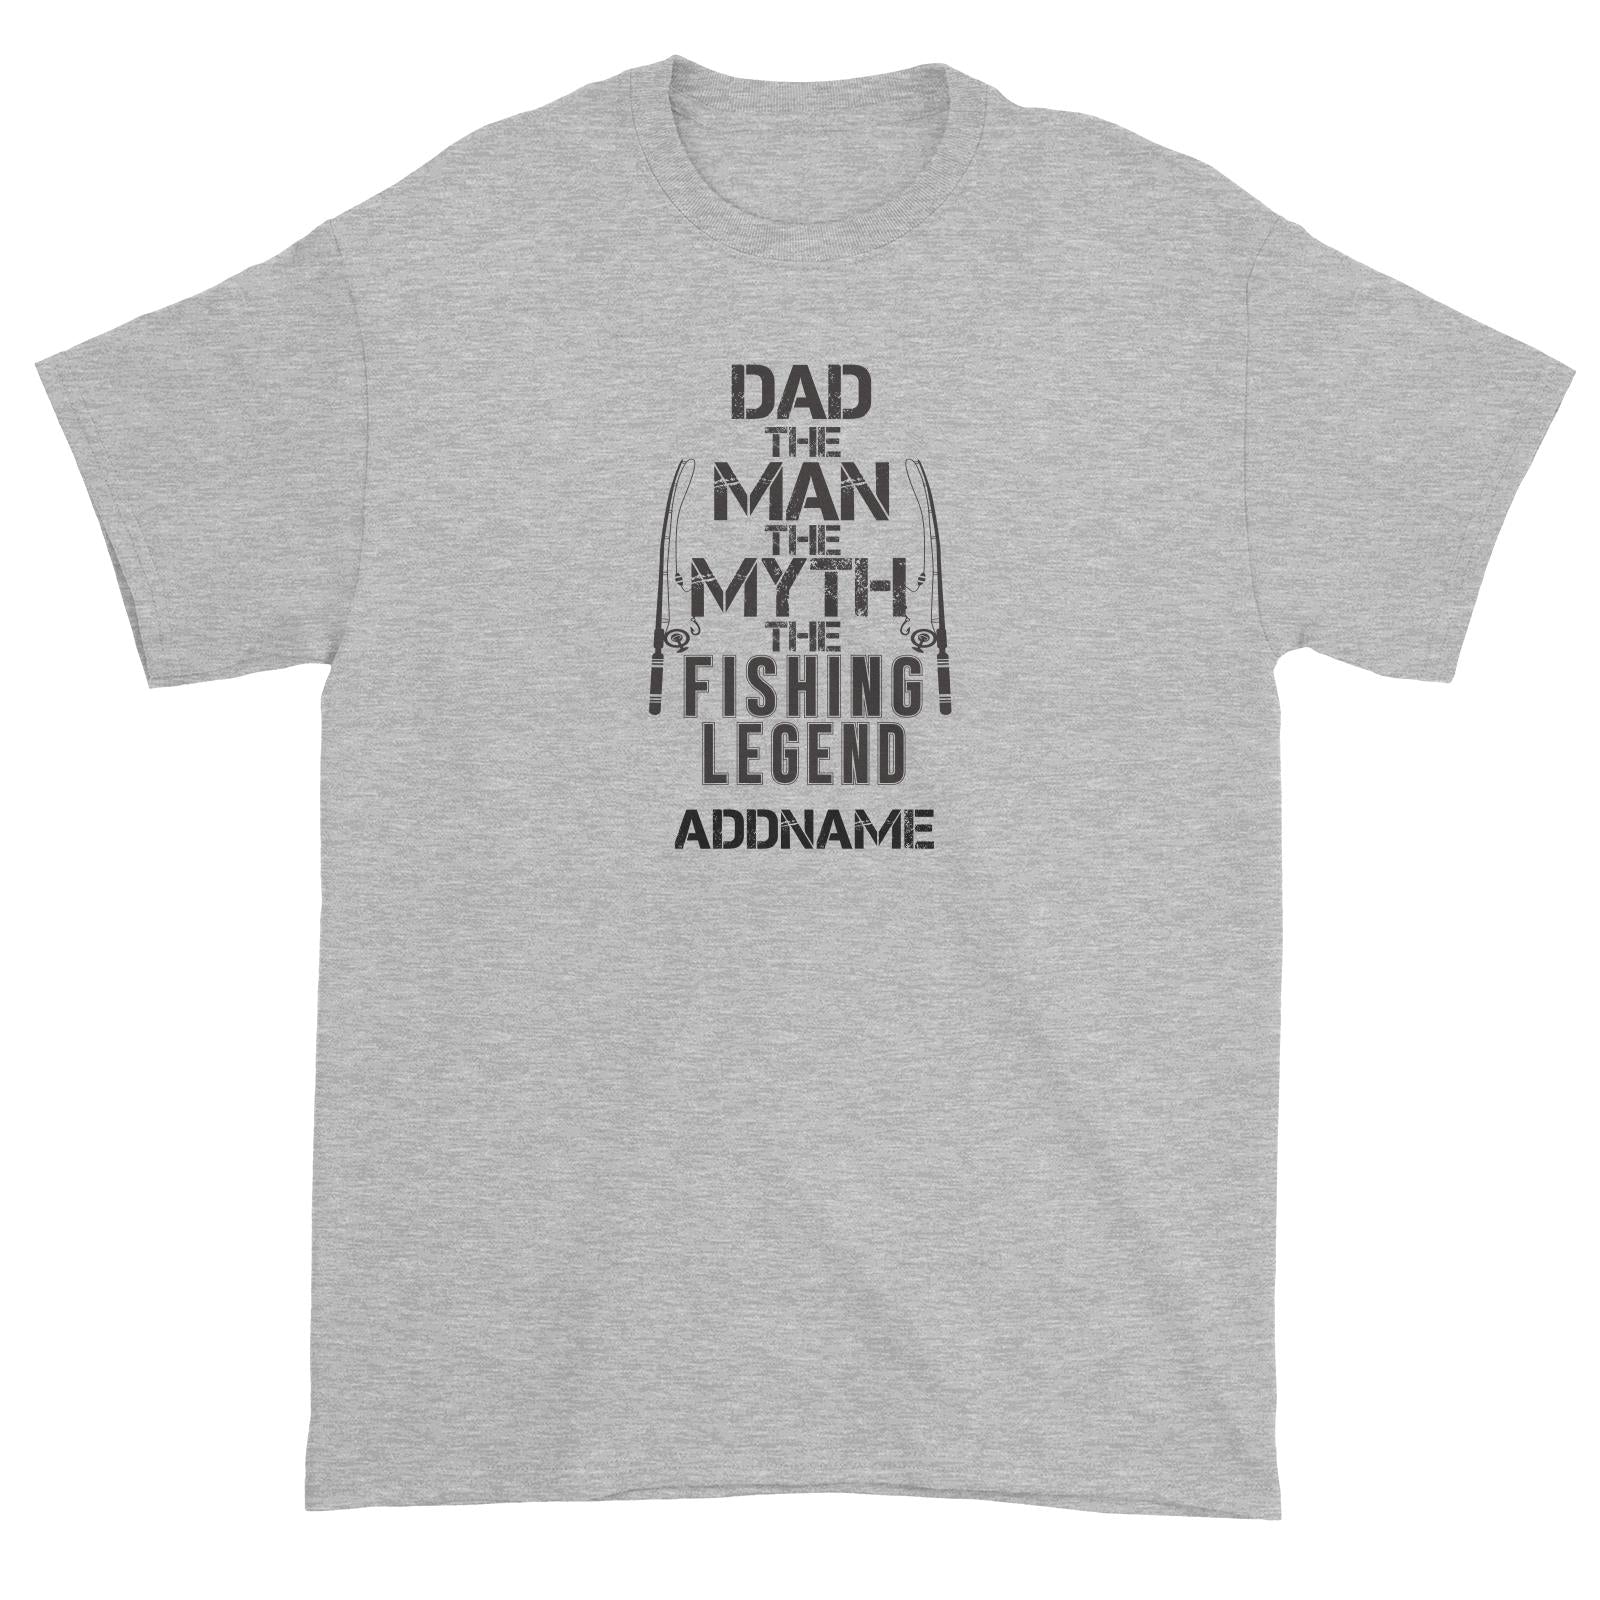 Dad The Man The Myth The Fishing Legend Addname Unisex T-Shirt